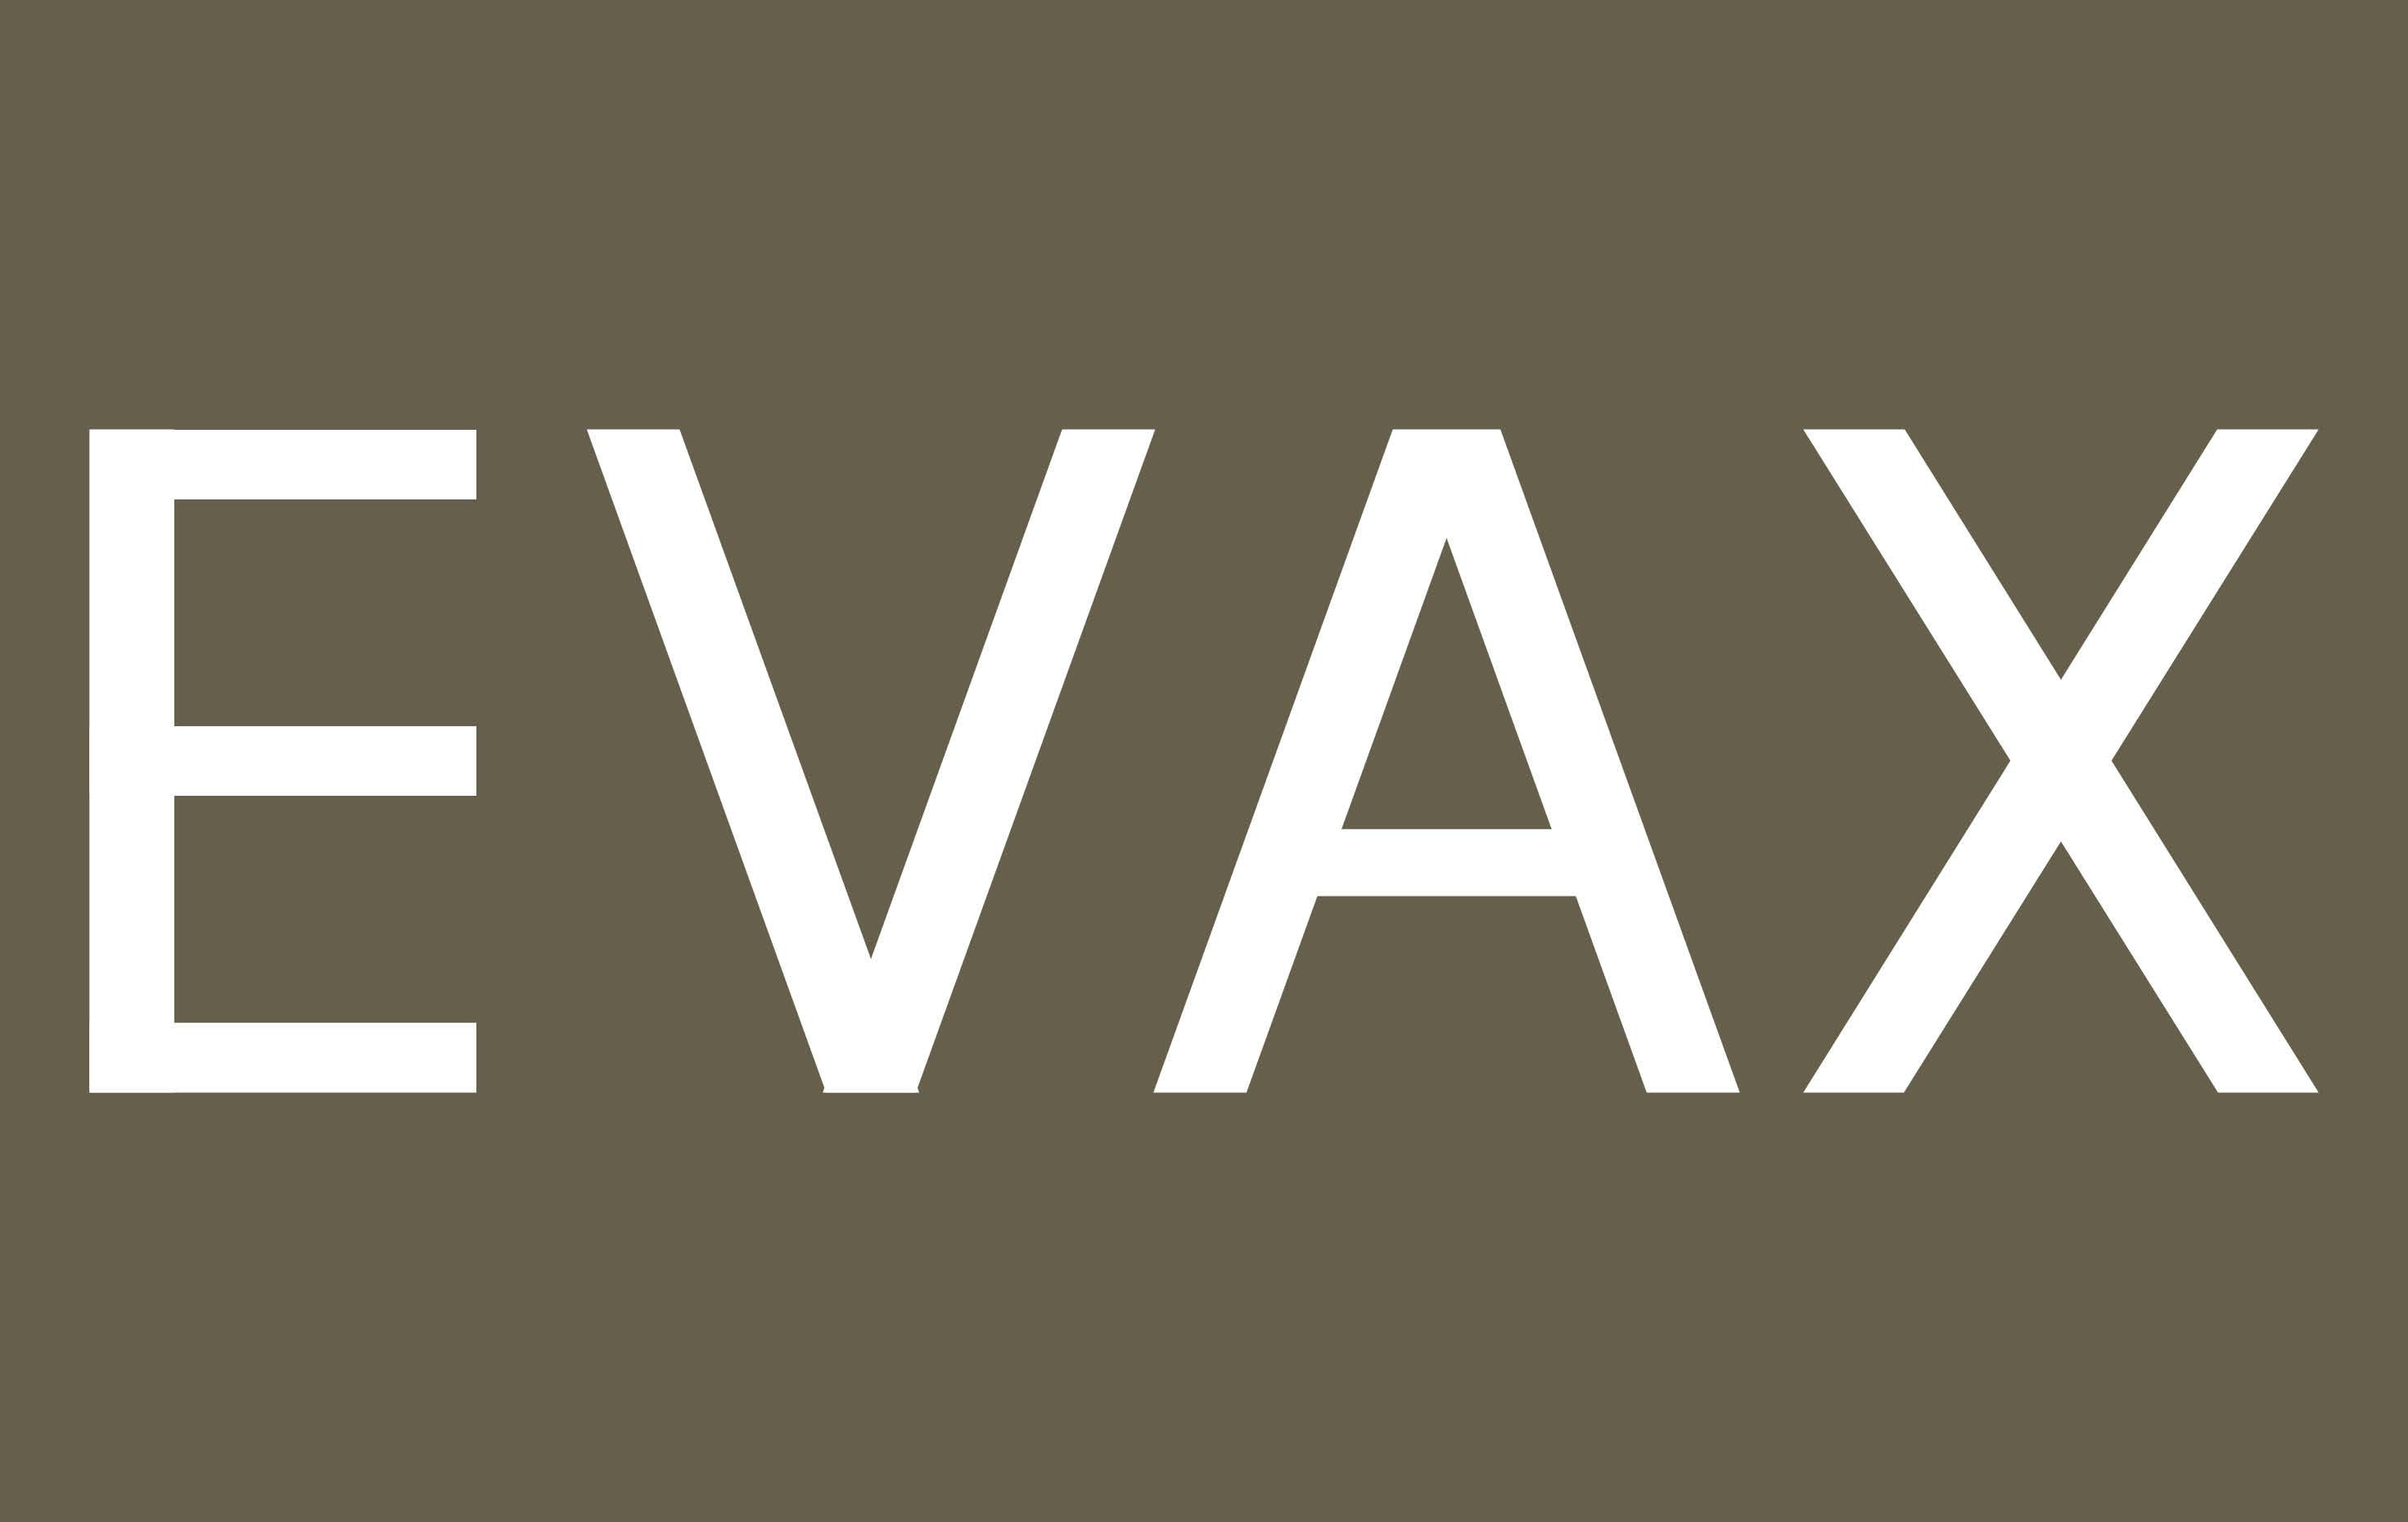 Evaxion Announces Phase 2 Clinical Trial Update: First Patient Completed Dosing with Personalized Cancer Vaccine EVX-01